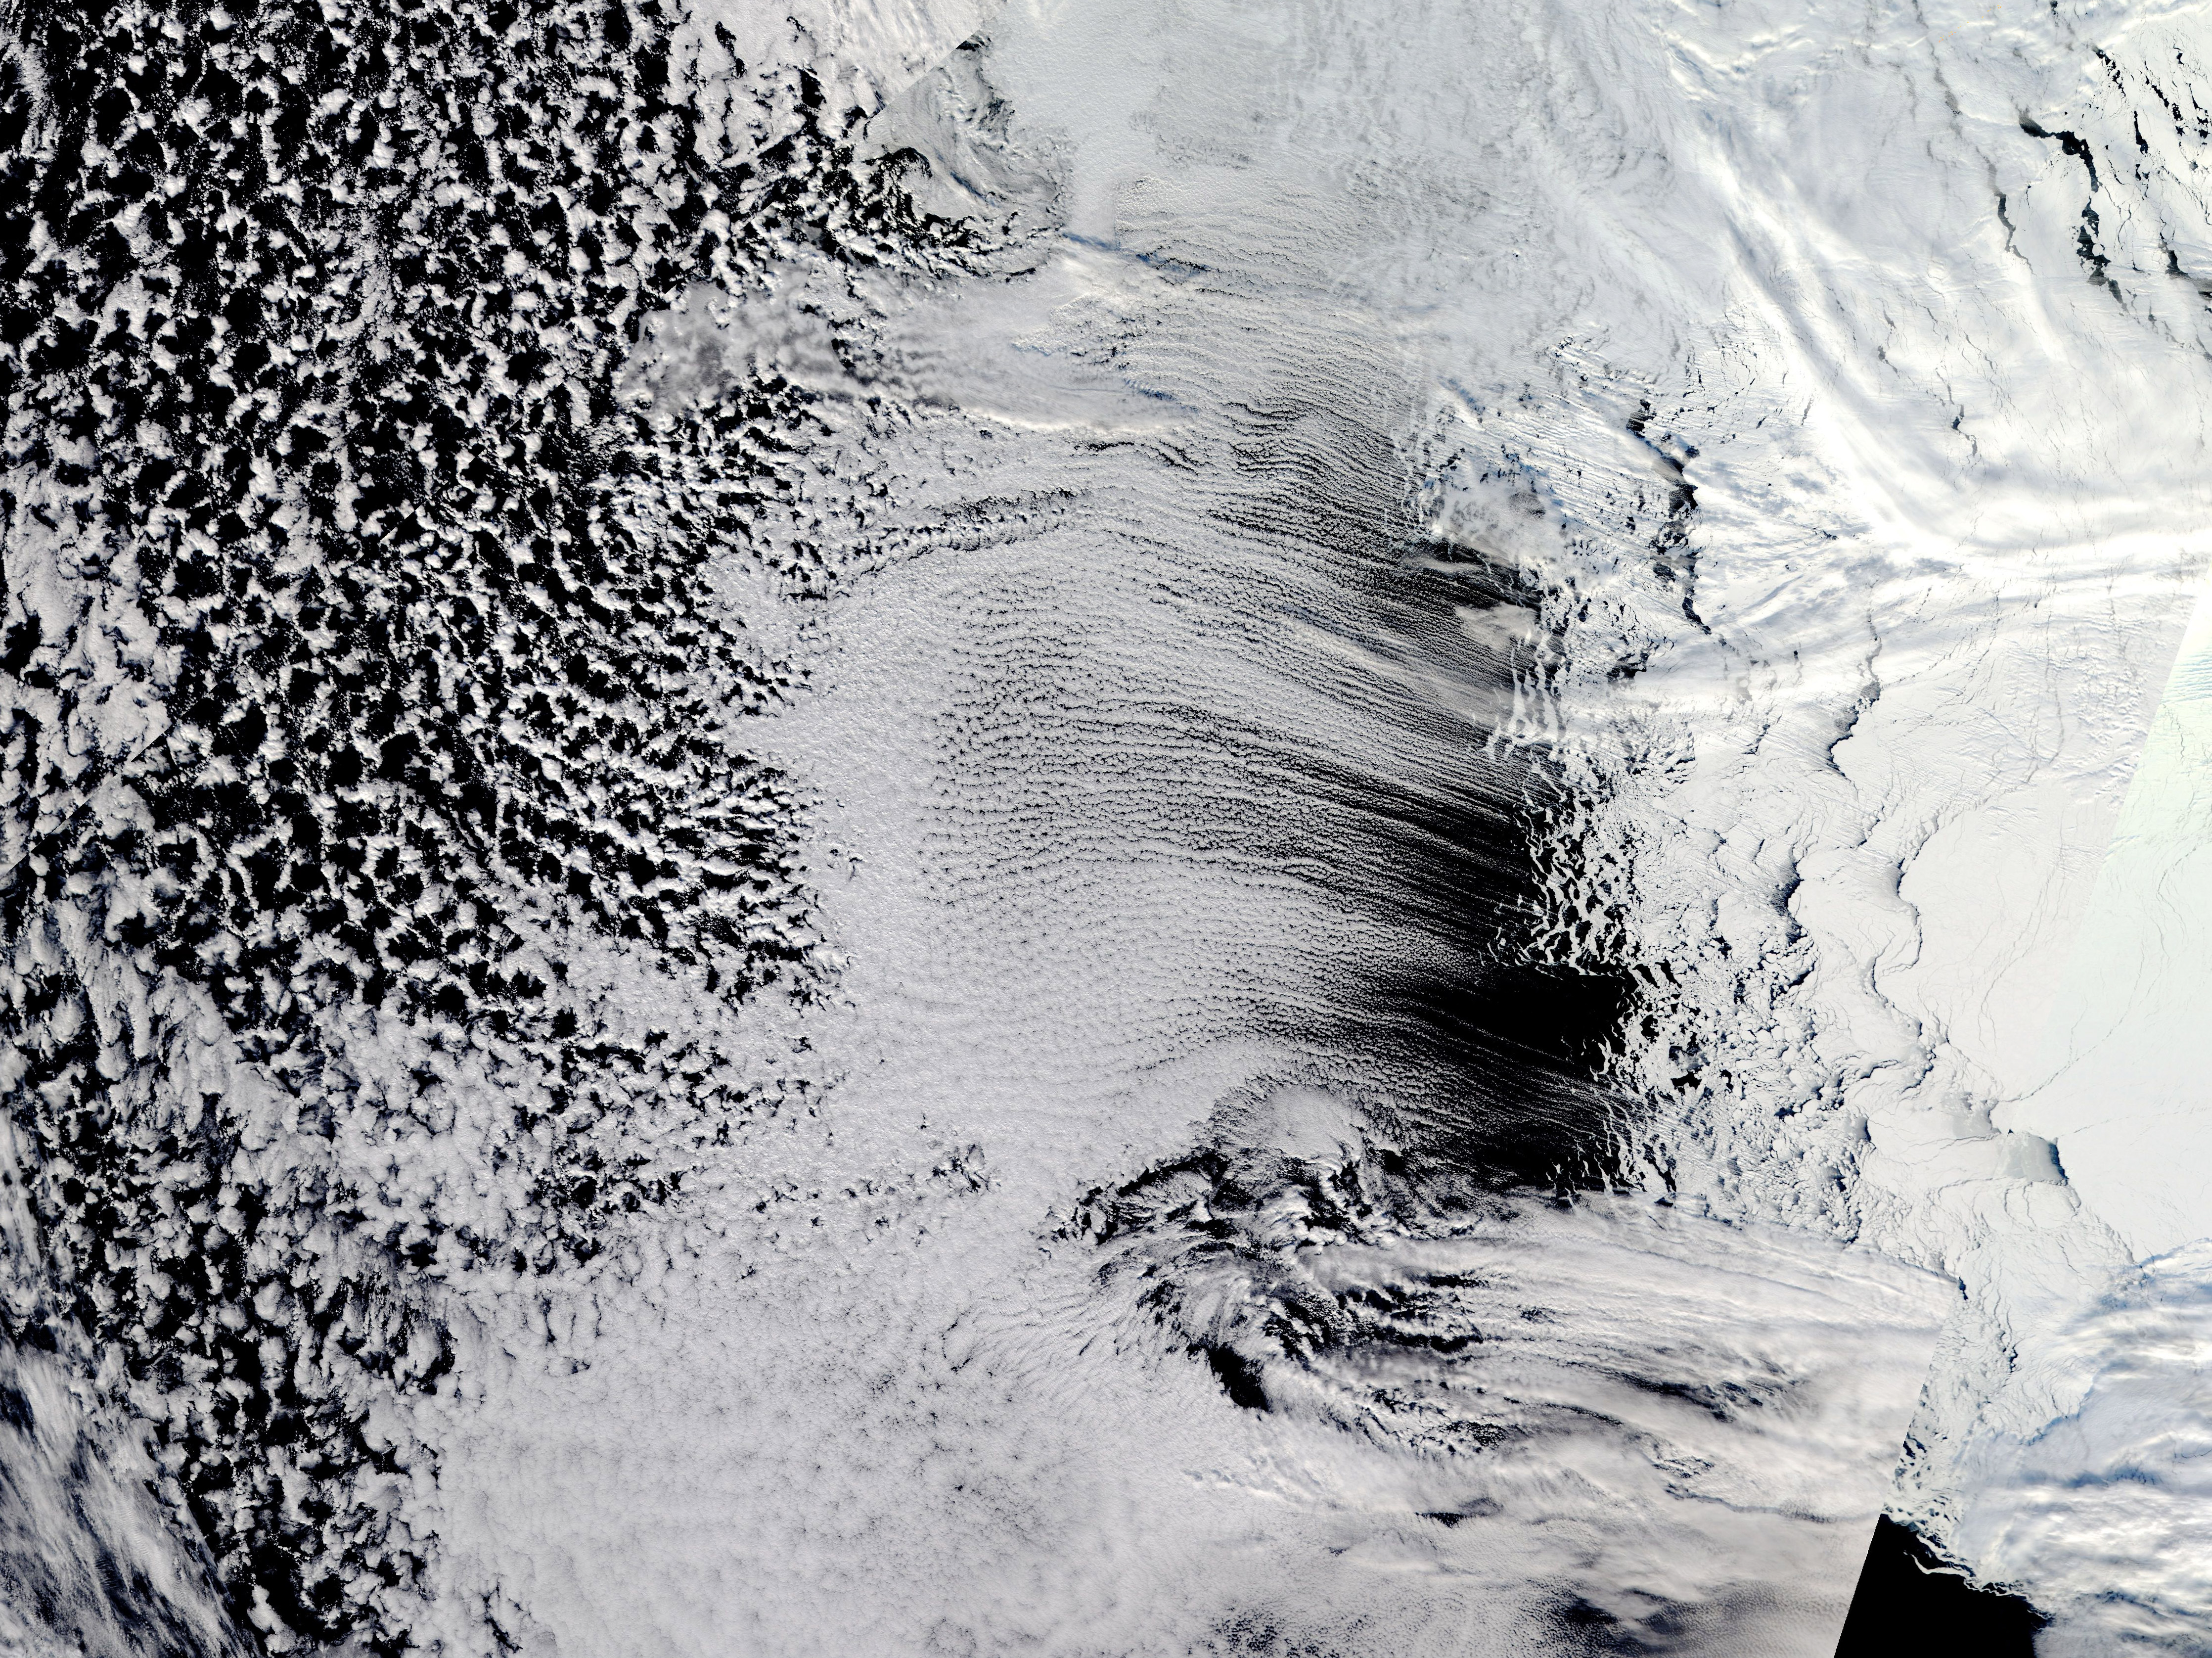 Cloud Streets Near Antarctica - related image preview